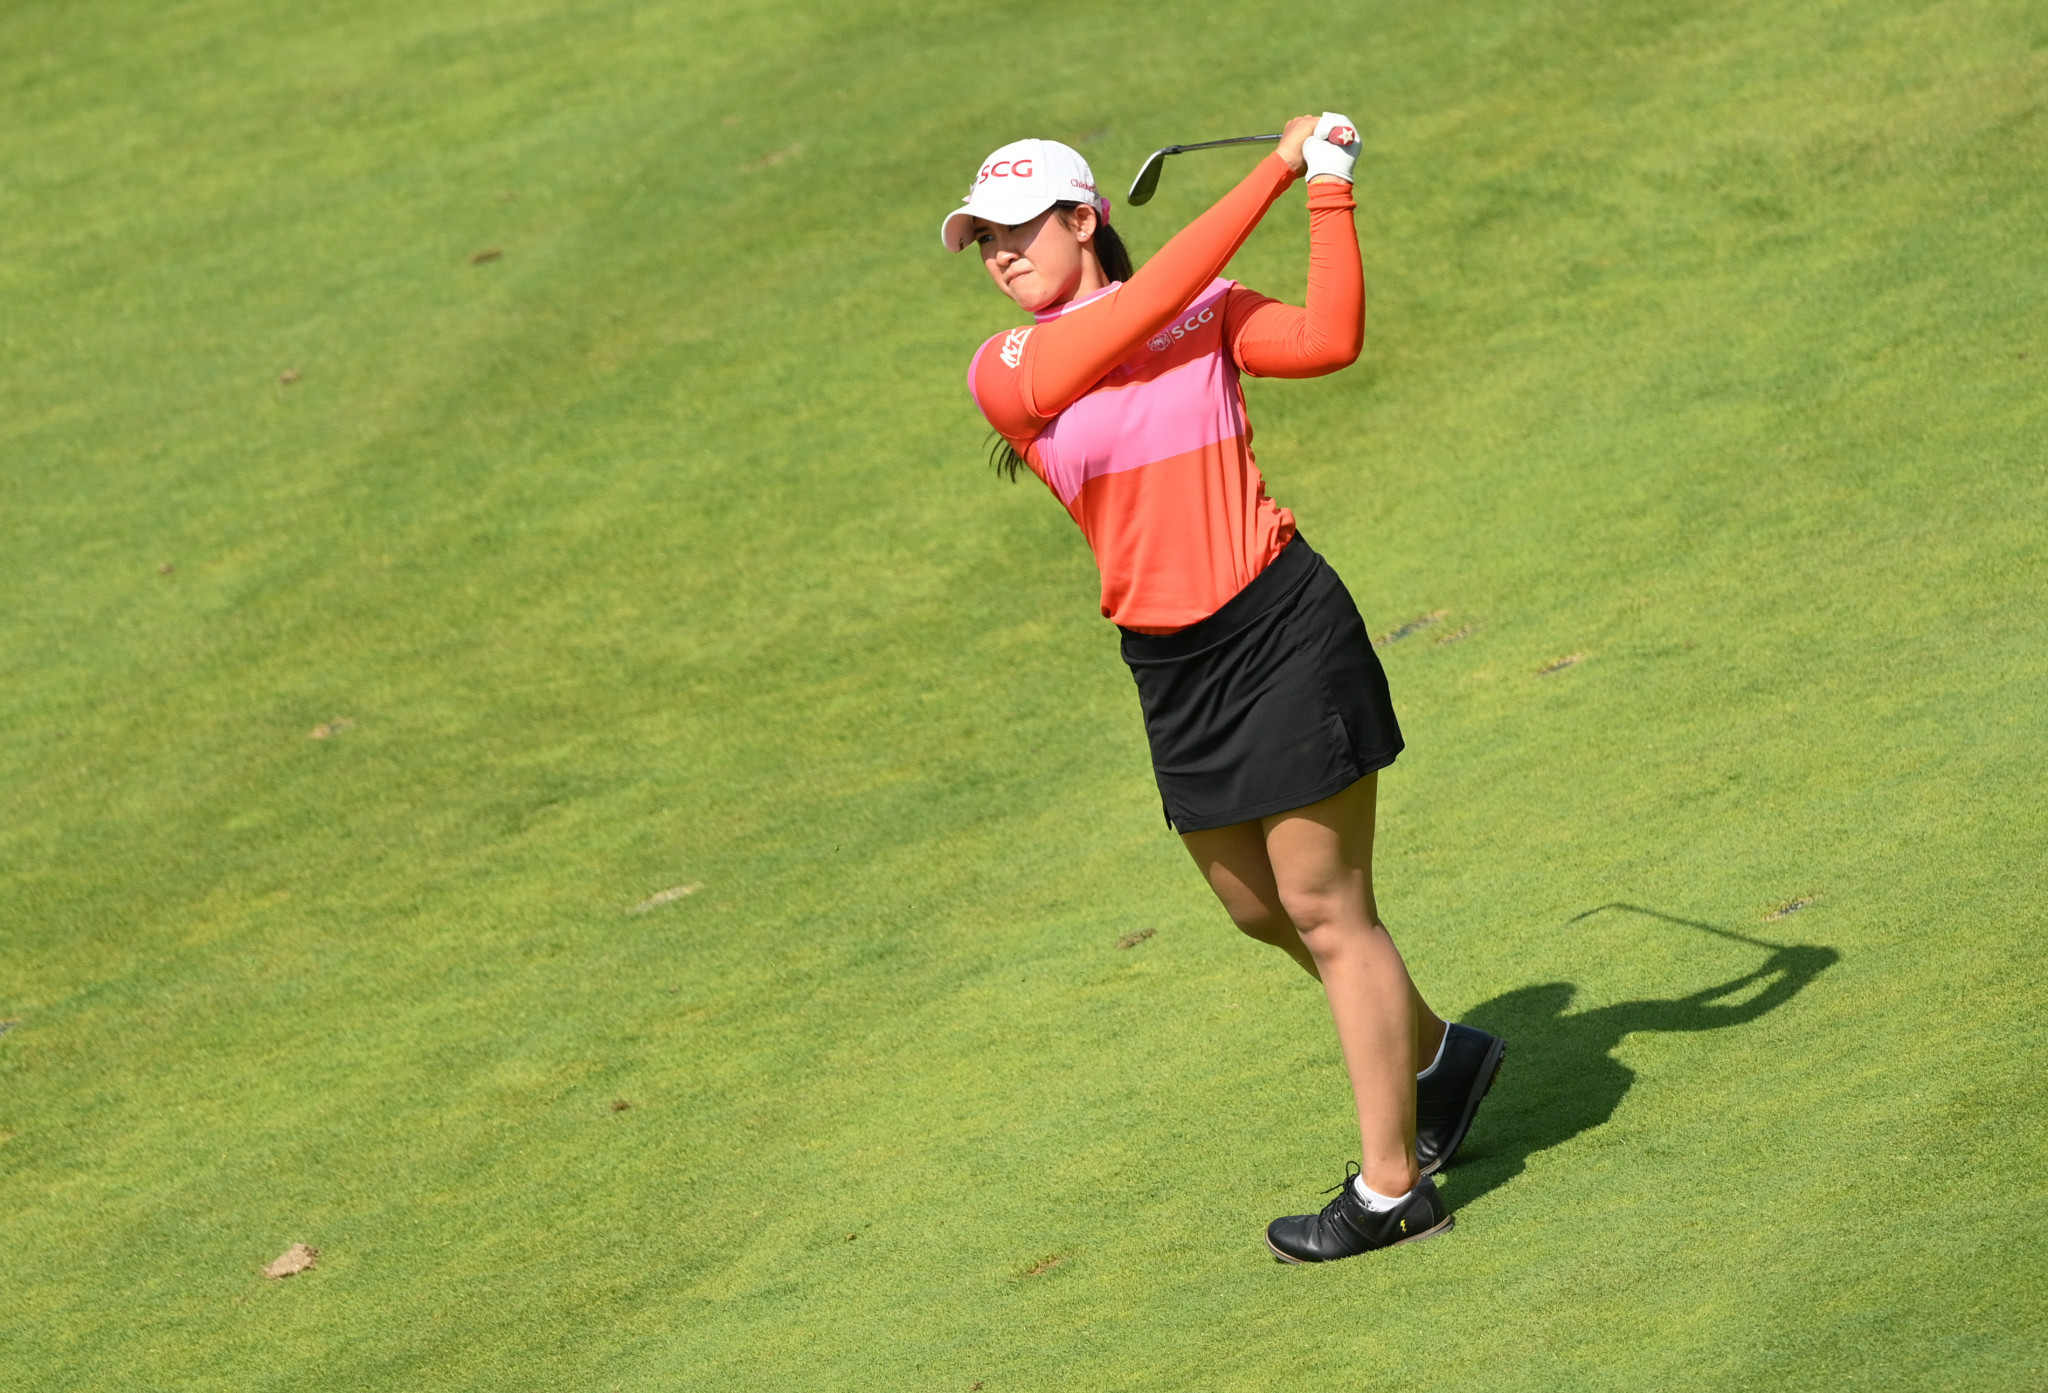 Co-leader after round one Pajaree Anannarukarn and fellow Thai player Moriya Jutanugarn are three behind Lee6 at the halfway point of the Evian Championship ©Getty Images